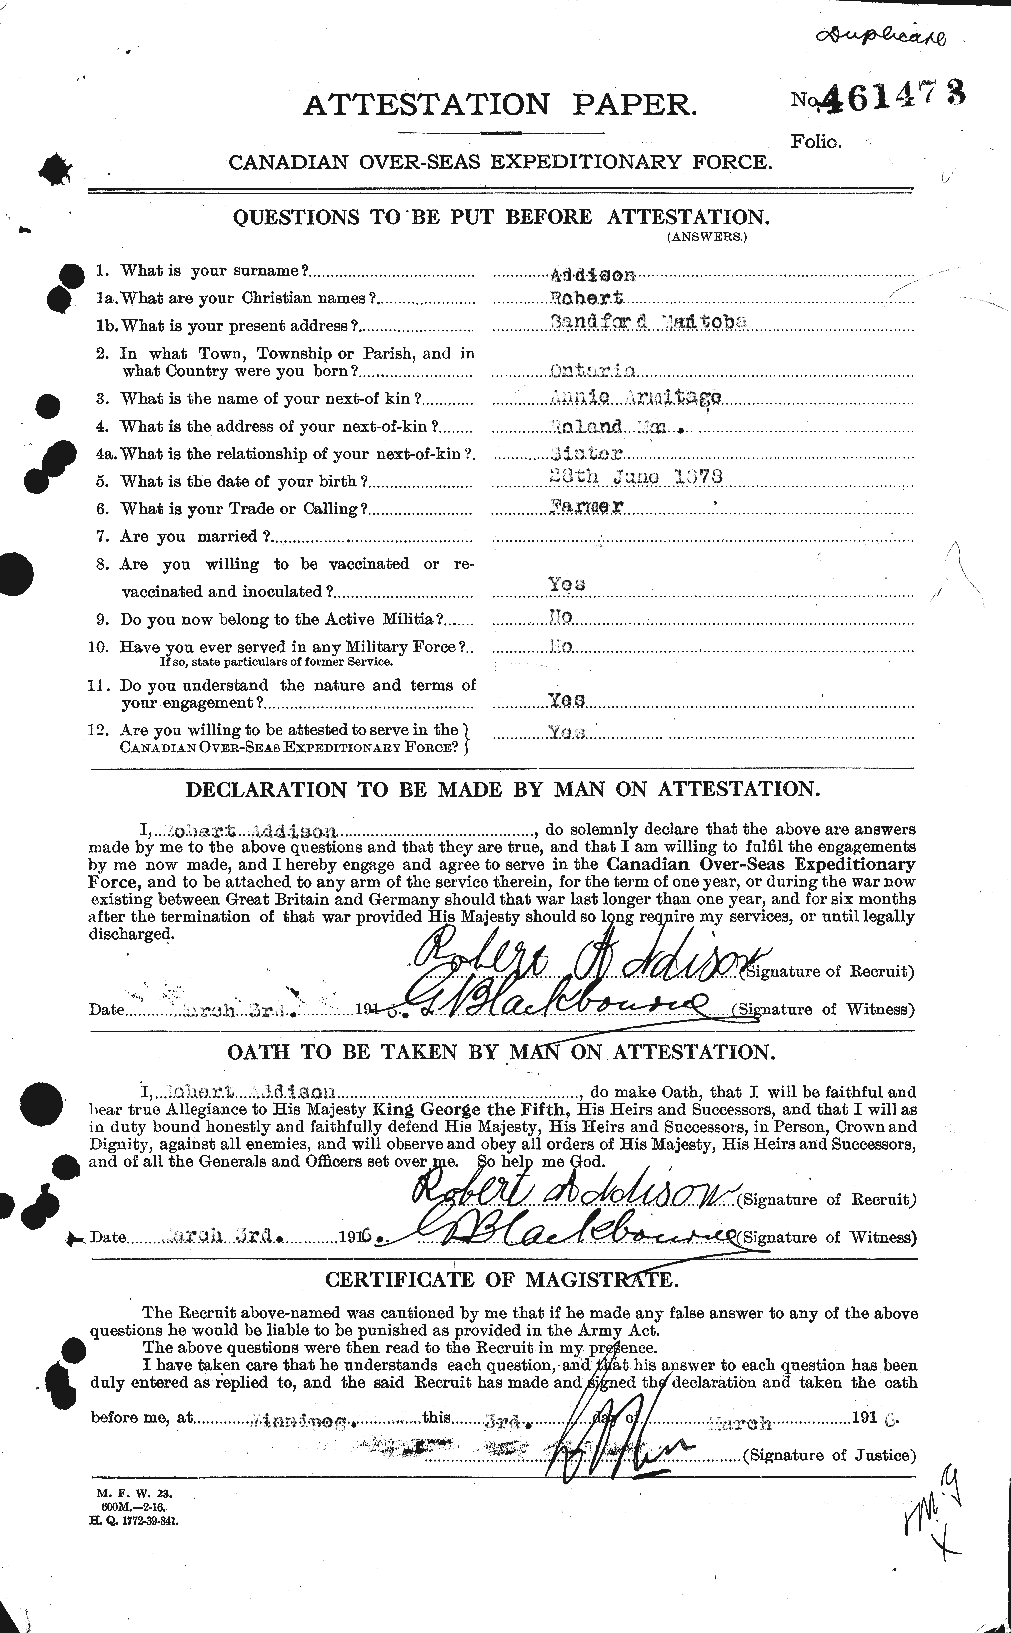 Personnel Records of the First World War - CEF 202514a